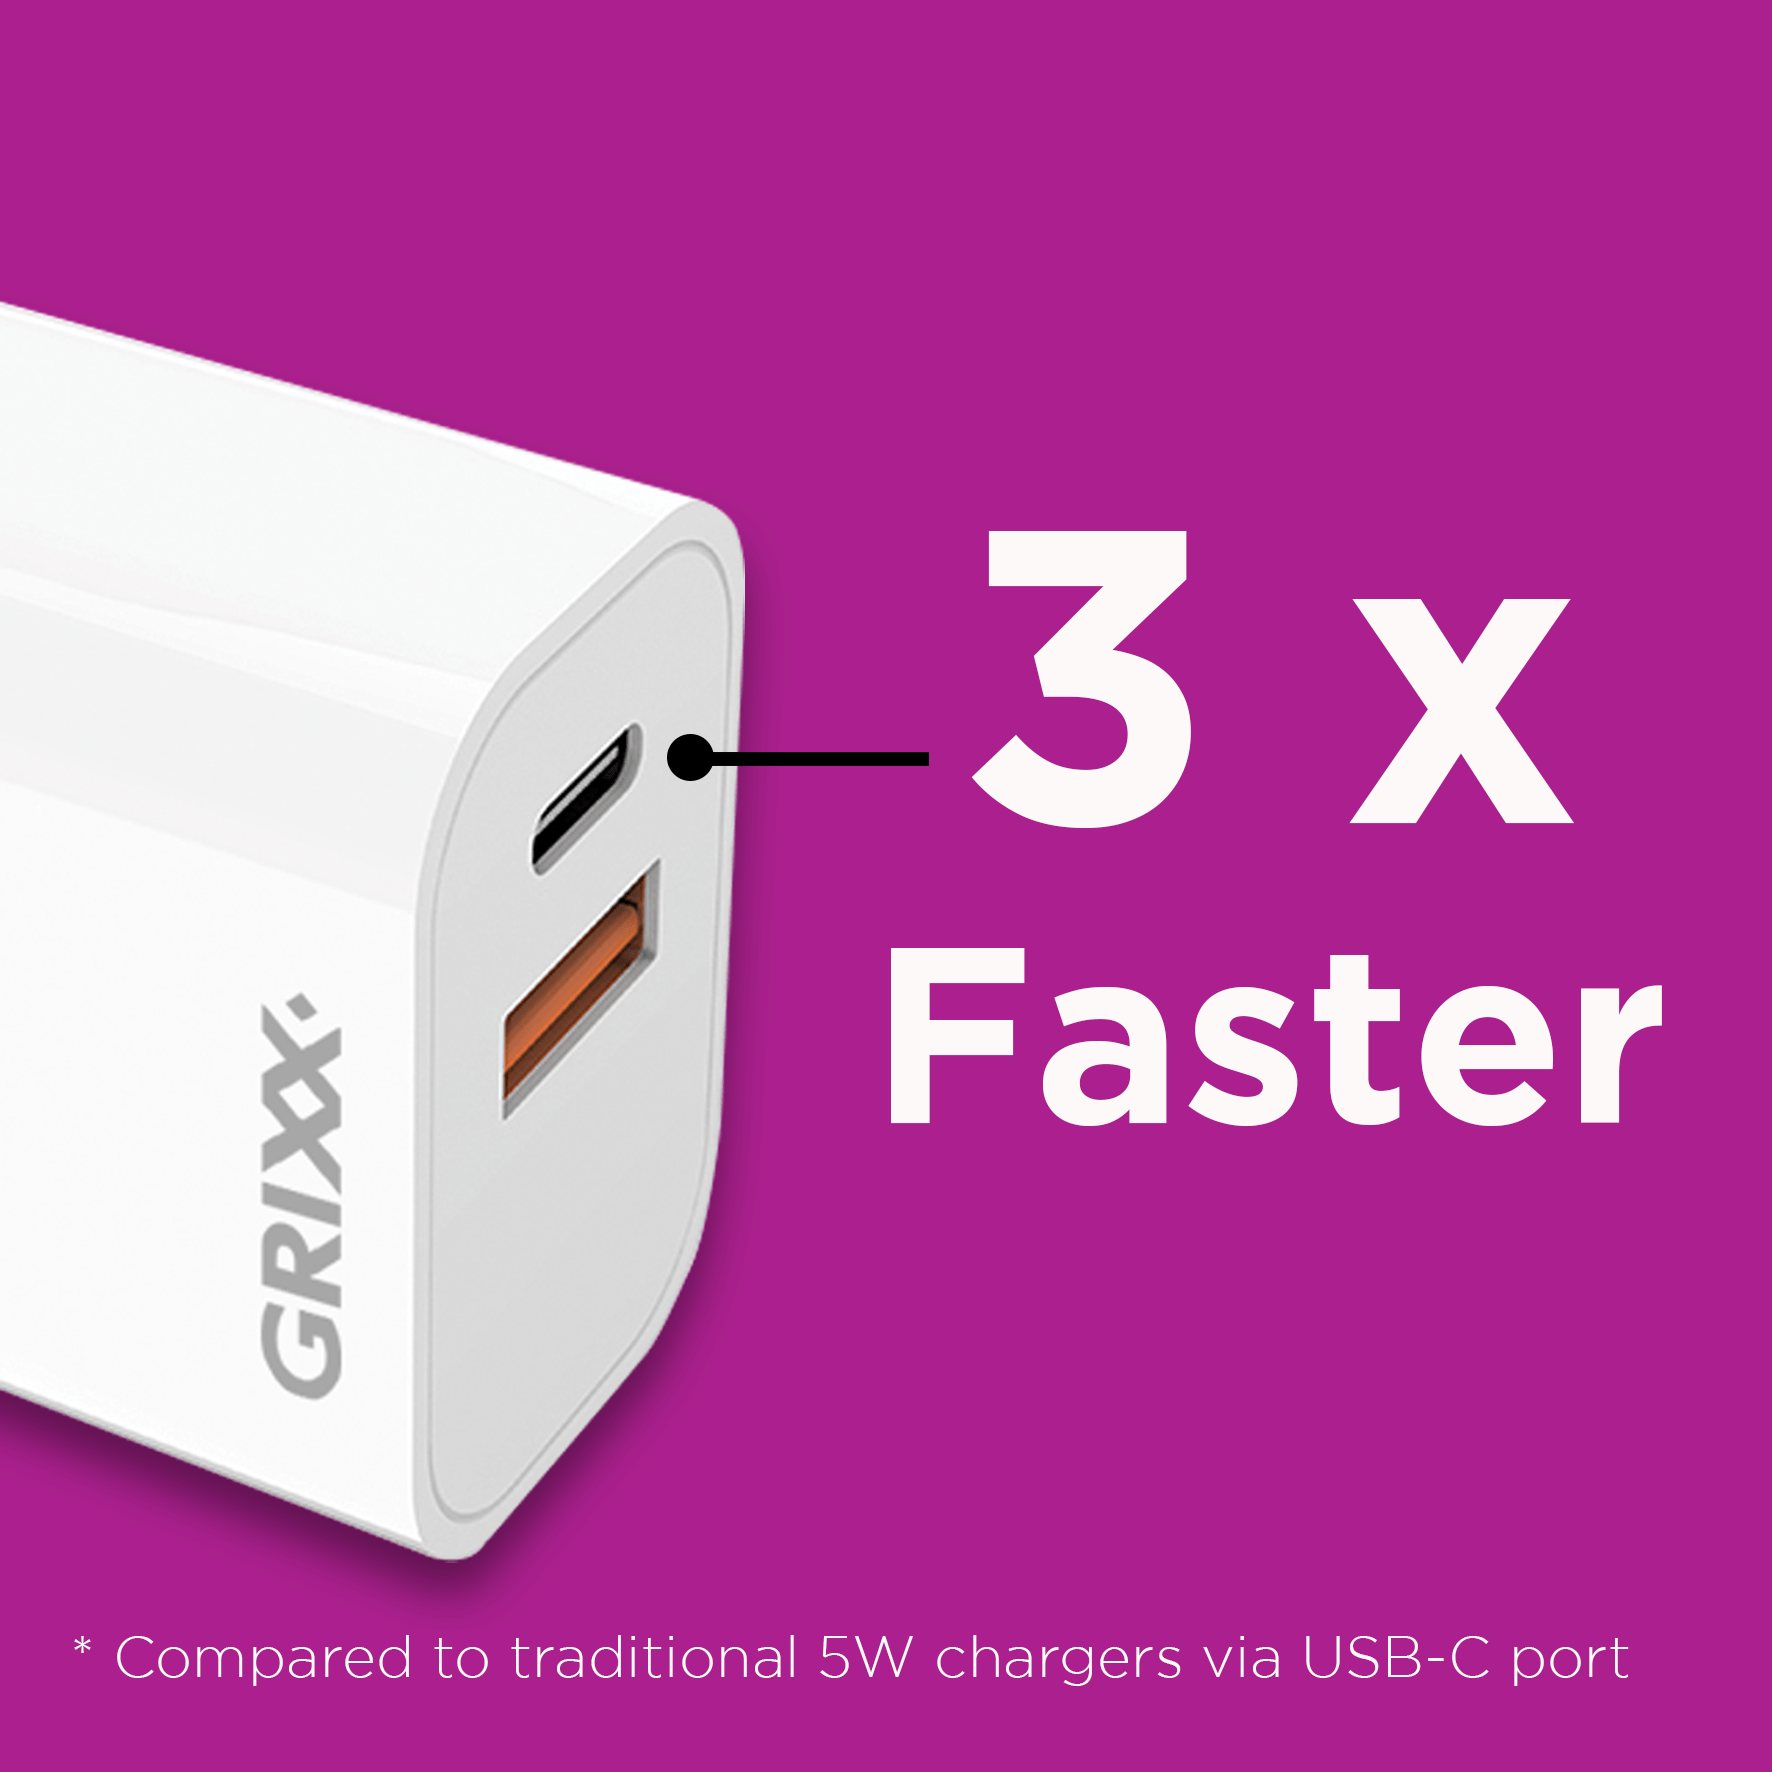 Grixx-Wall-Charger_dual-charger-USB-C-USB-A_3x-faster.png